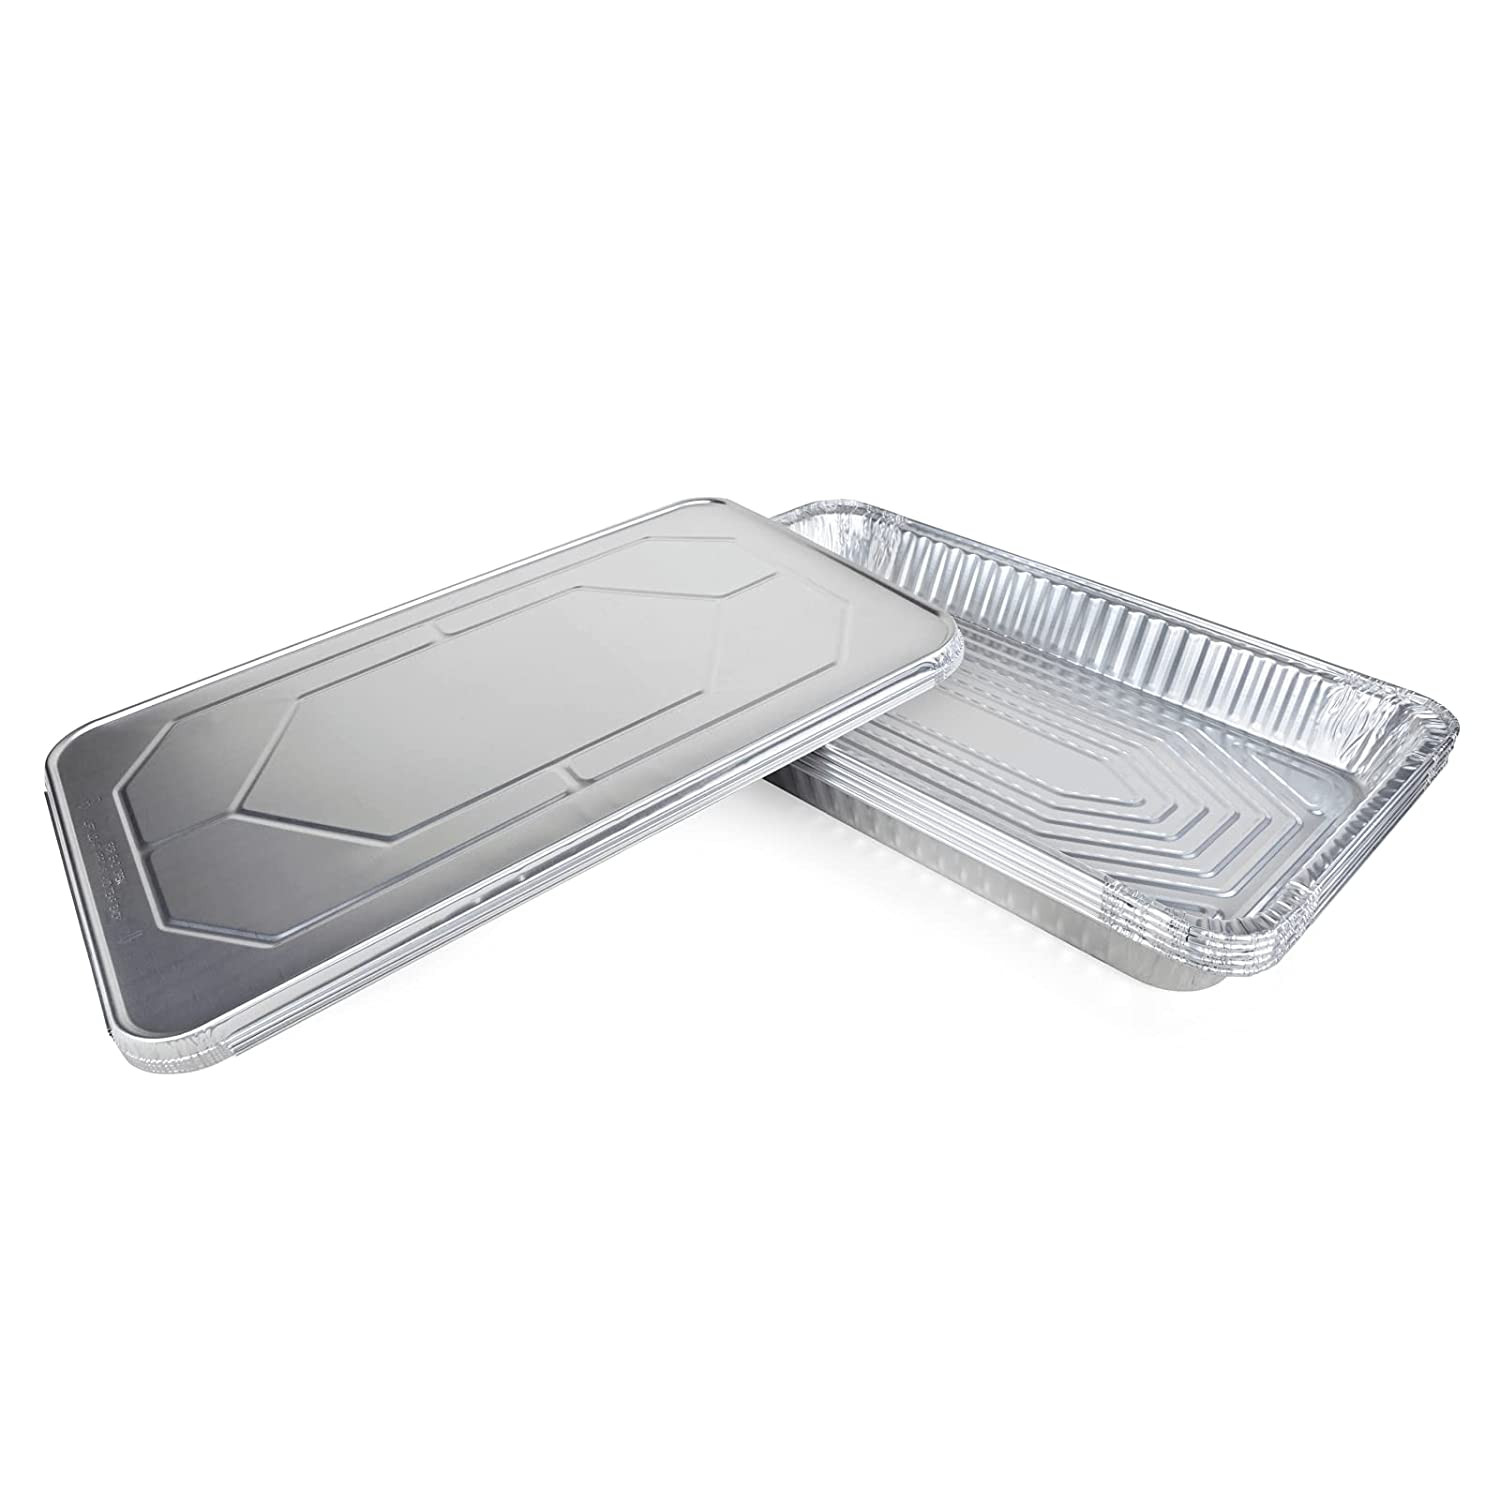 9 Round Aluminum Foil Pans (Pack of 25/50/100) for Roasting, Baking,  Cooking, Freezing buy in stock in U.S. in IDL Packaging